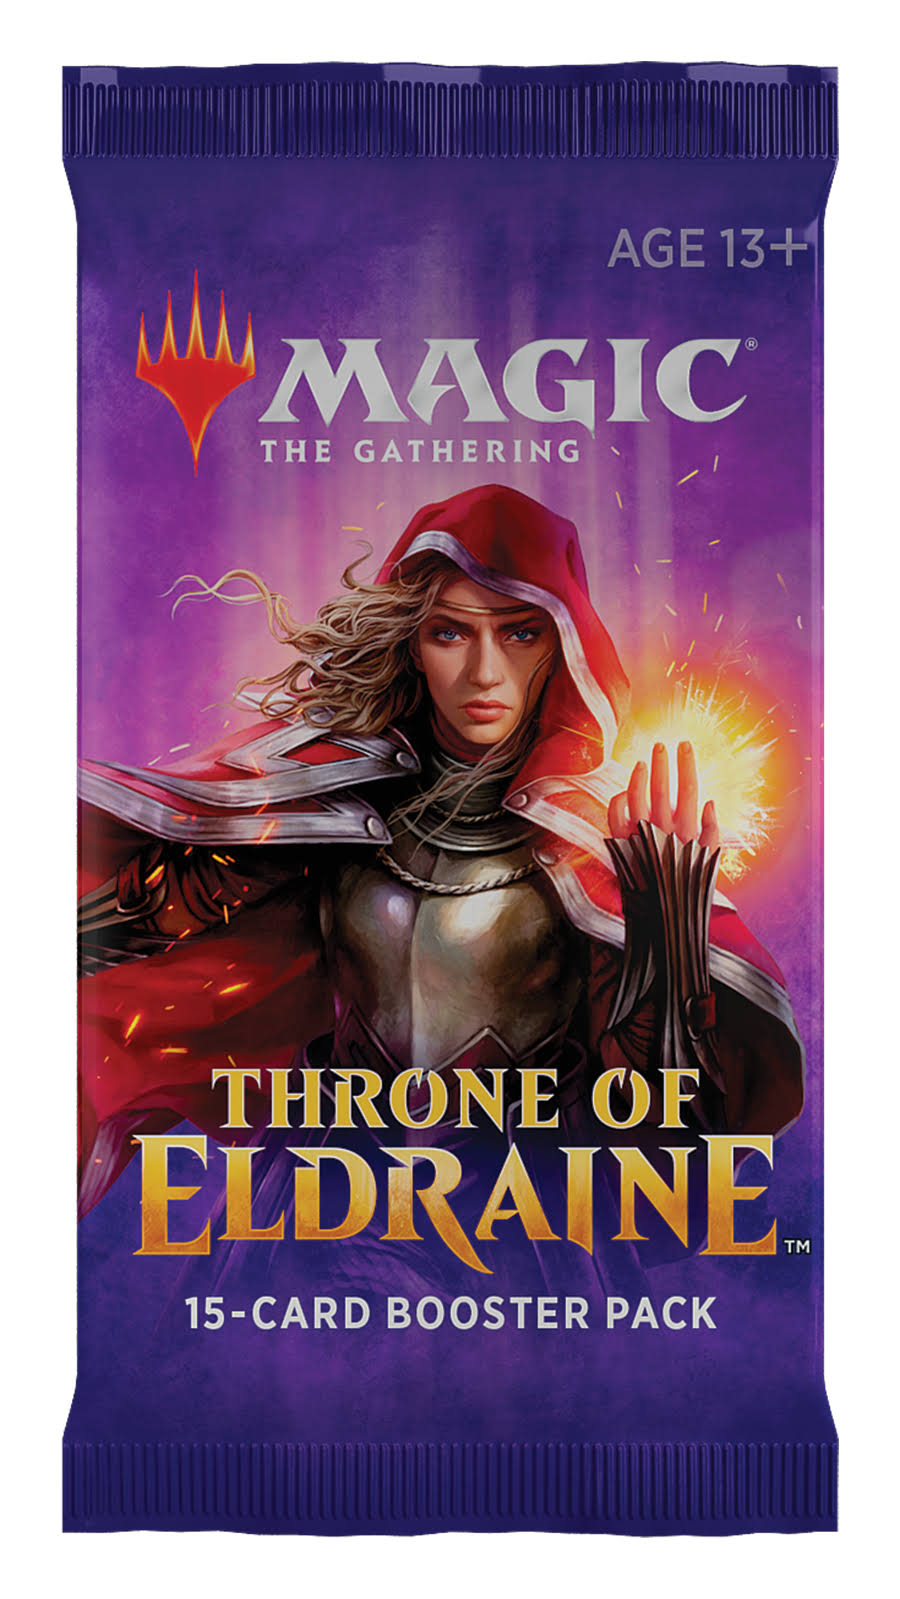 Magic the Gathering Throne of Eldraine Booster Pack